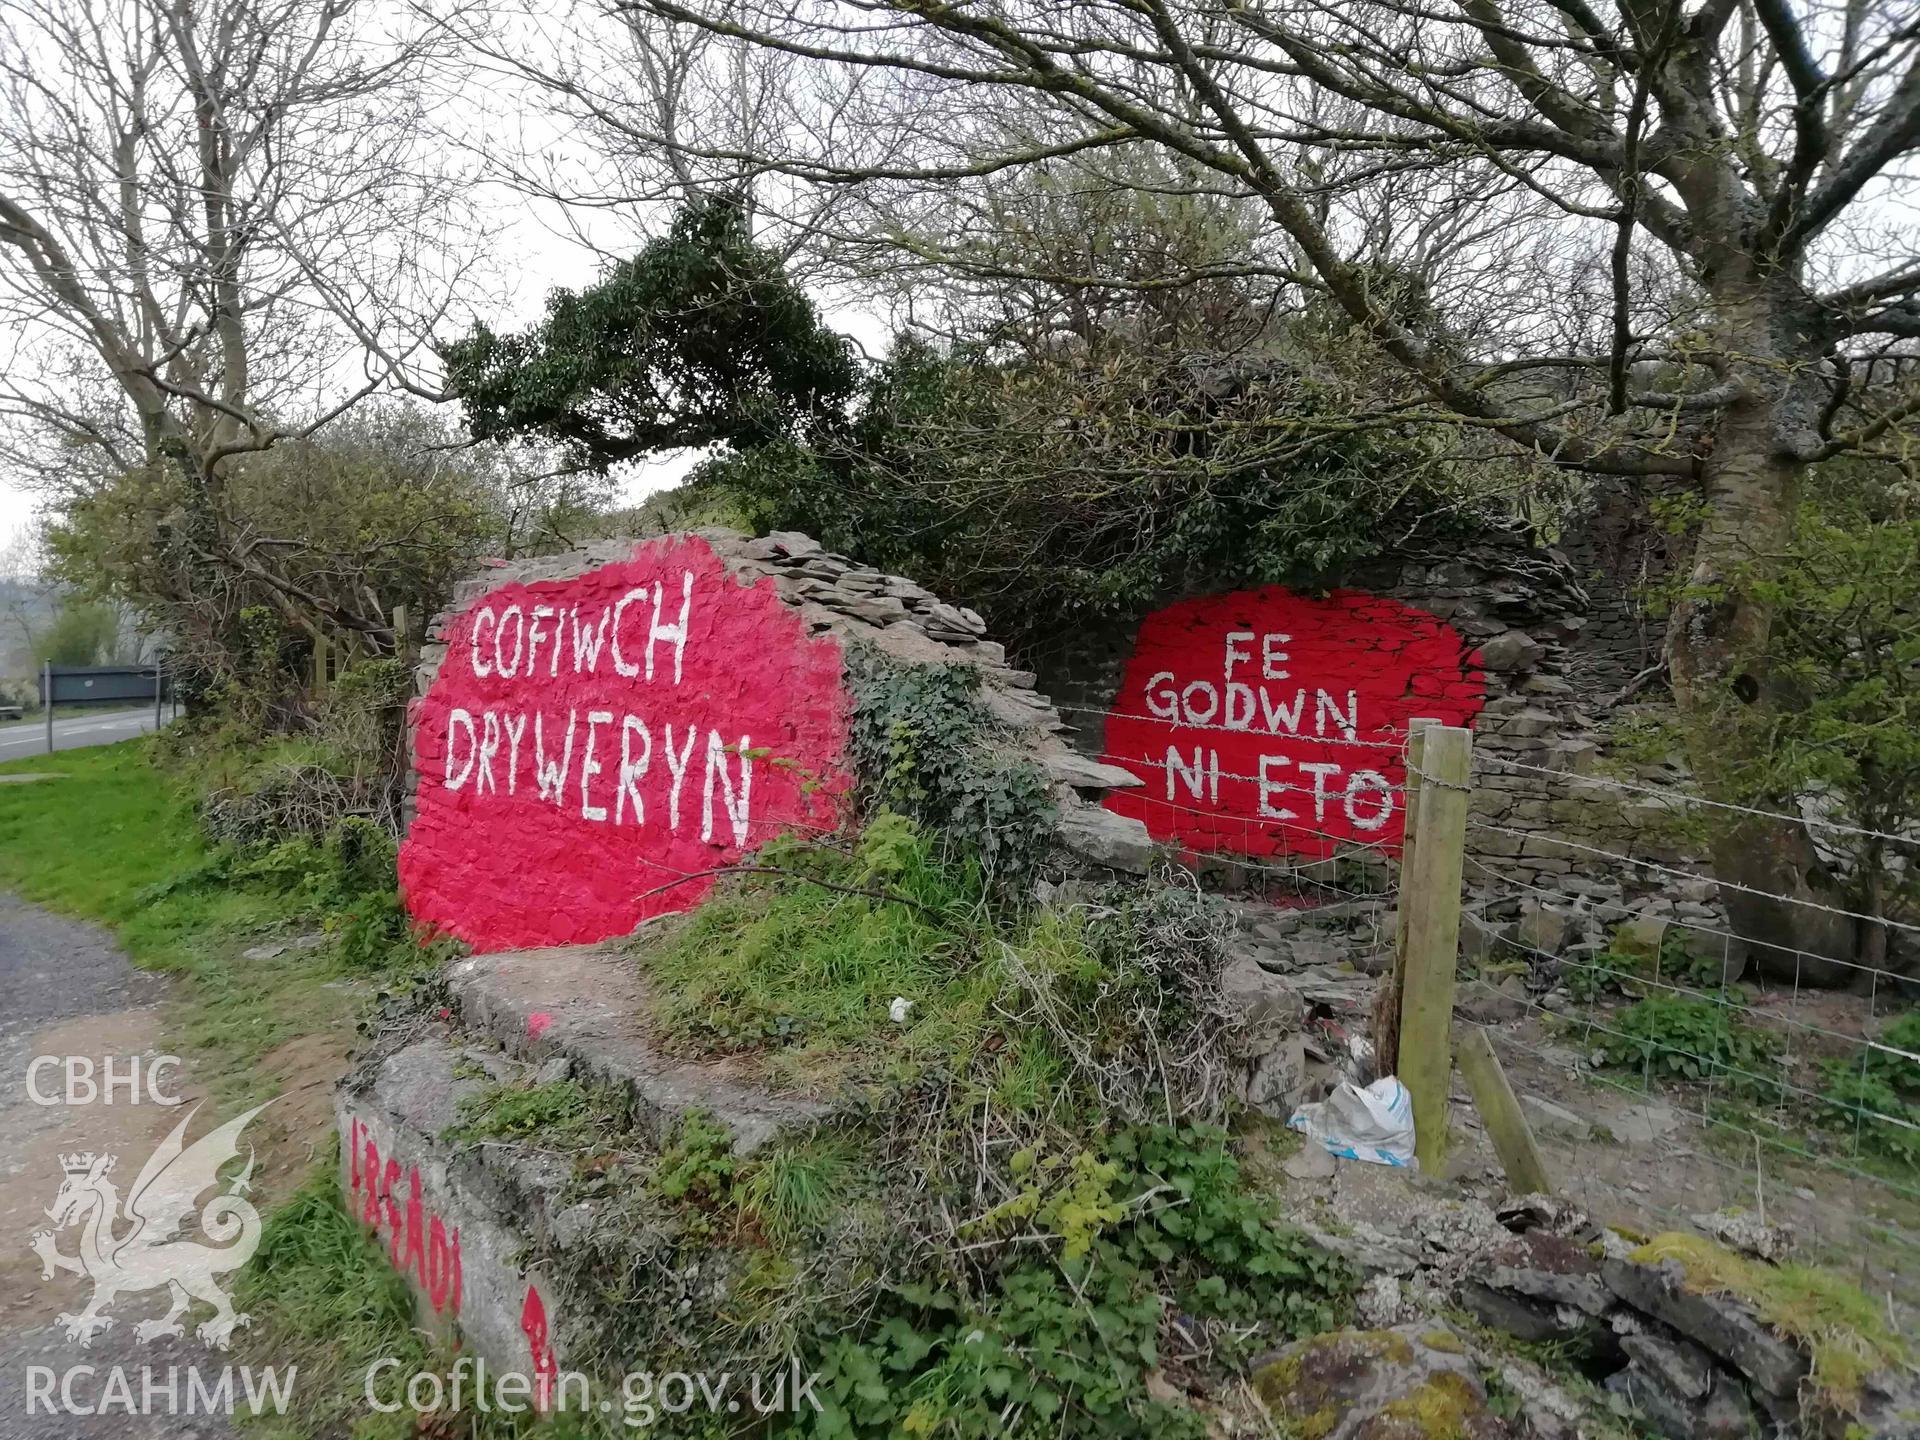 Digital colour photograph showing Cofiwch Dryweryn Wall, following vandalism, with additional message: 'Fe Godwn Ni Eto' painted on wall behind. Taken 15 April 2019.